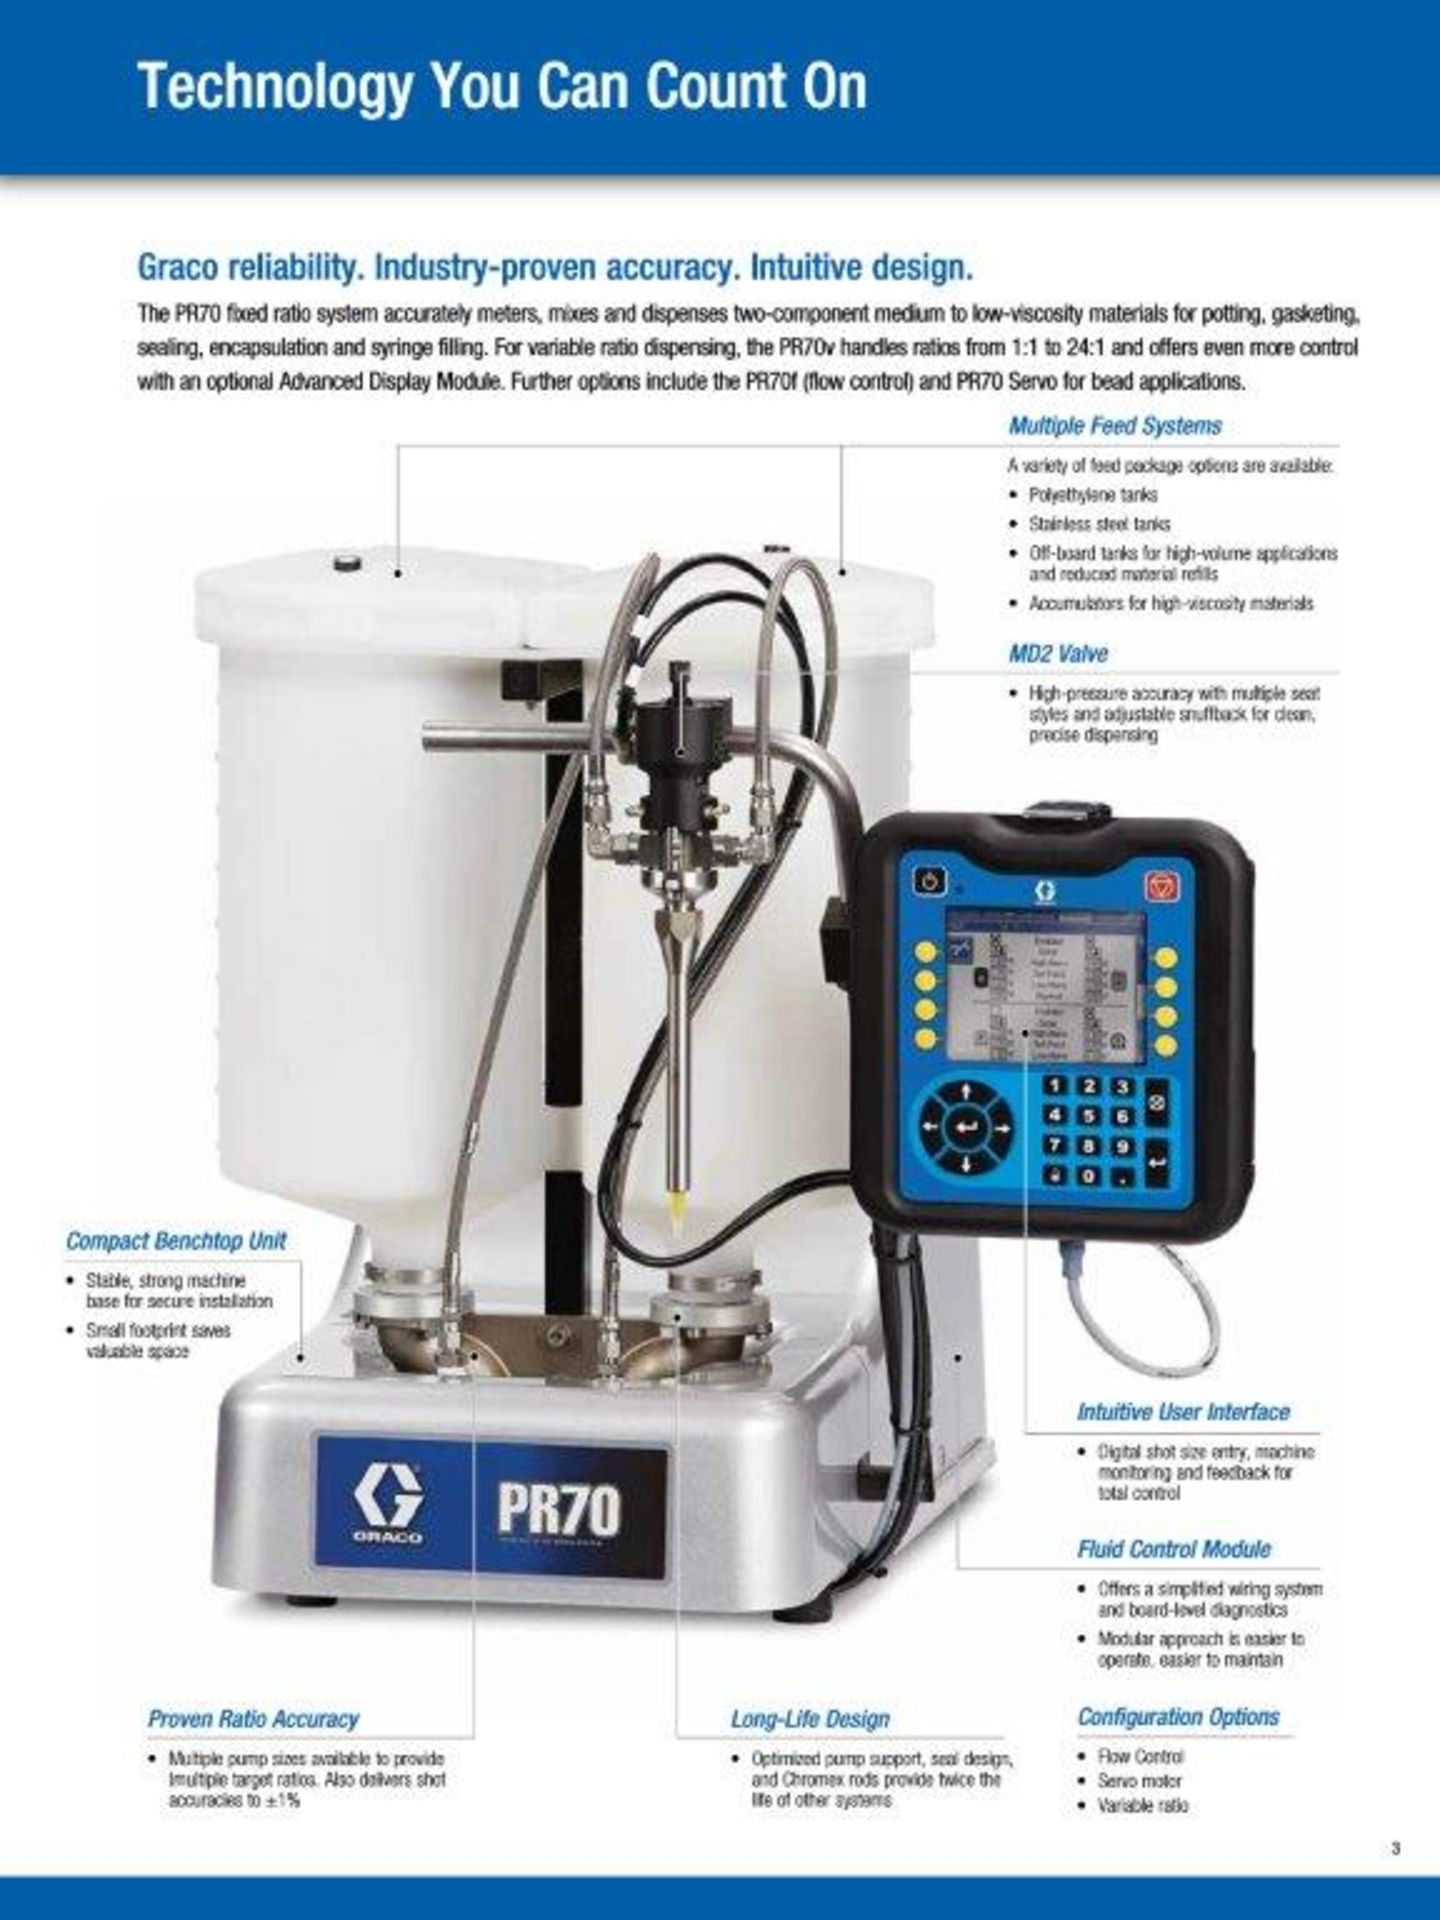 Graco PR70™ Meter, Mix and Dispense Systems (PDF manual available in photos) - Image 10 of 15